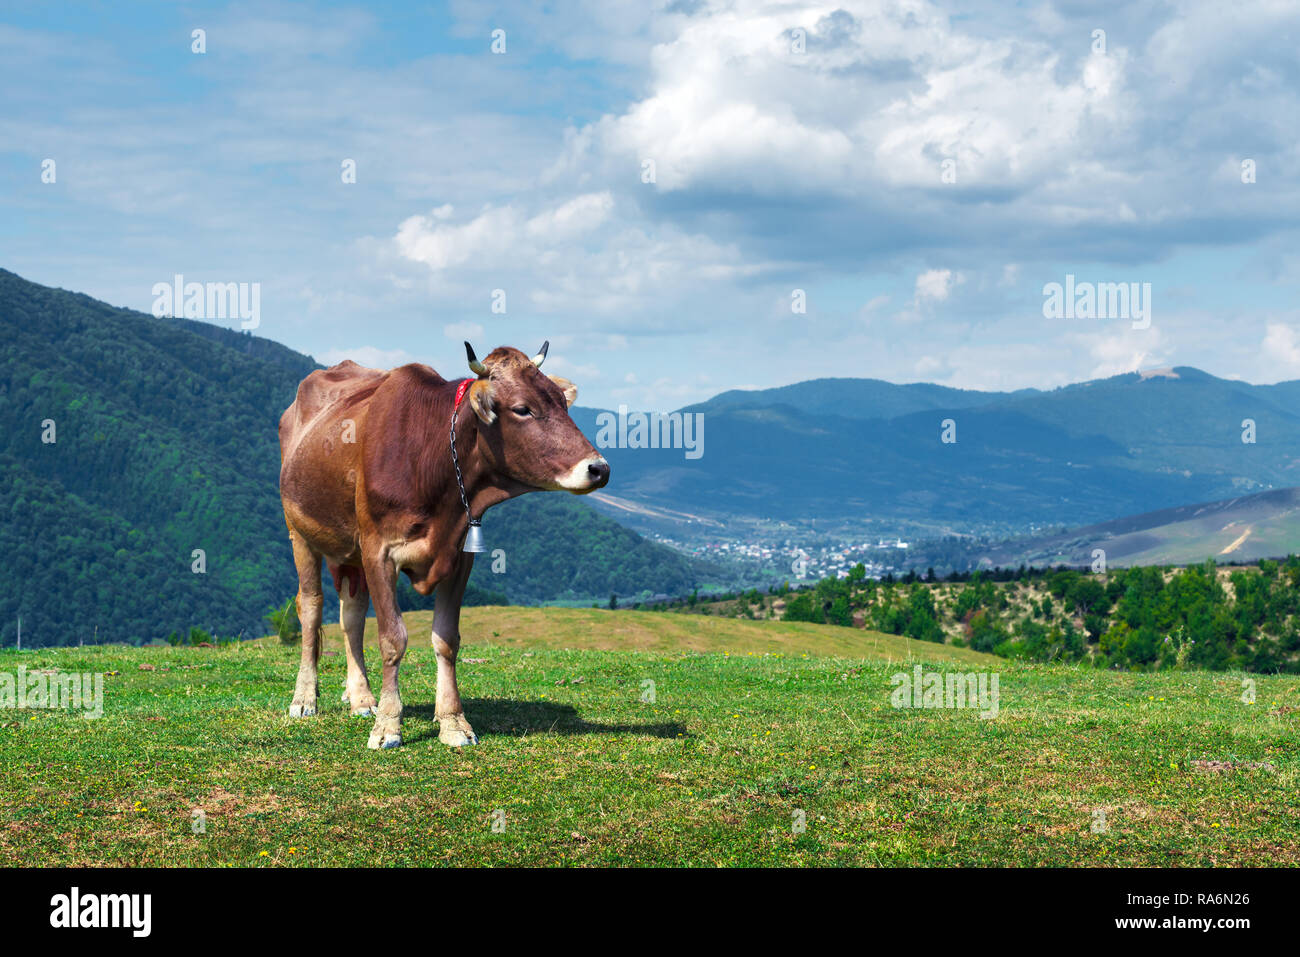 Cow on green pasture in mountains. Beauty view on green forest and blue hills Stock Photo